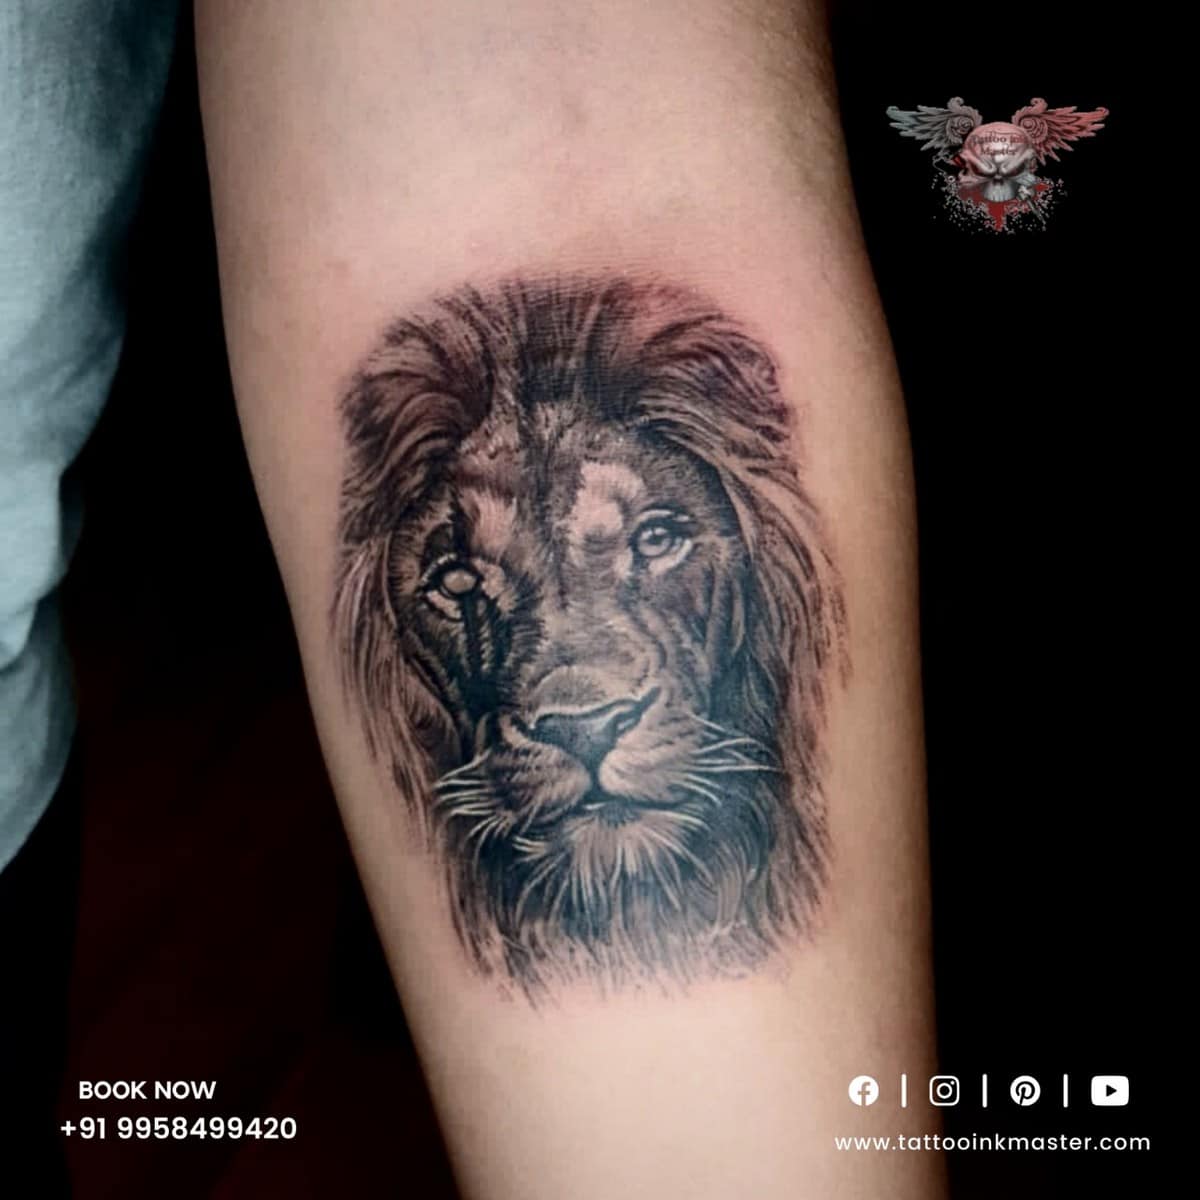 Little Tattoos — The Lion King Simba's tattoo on the bicep.